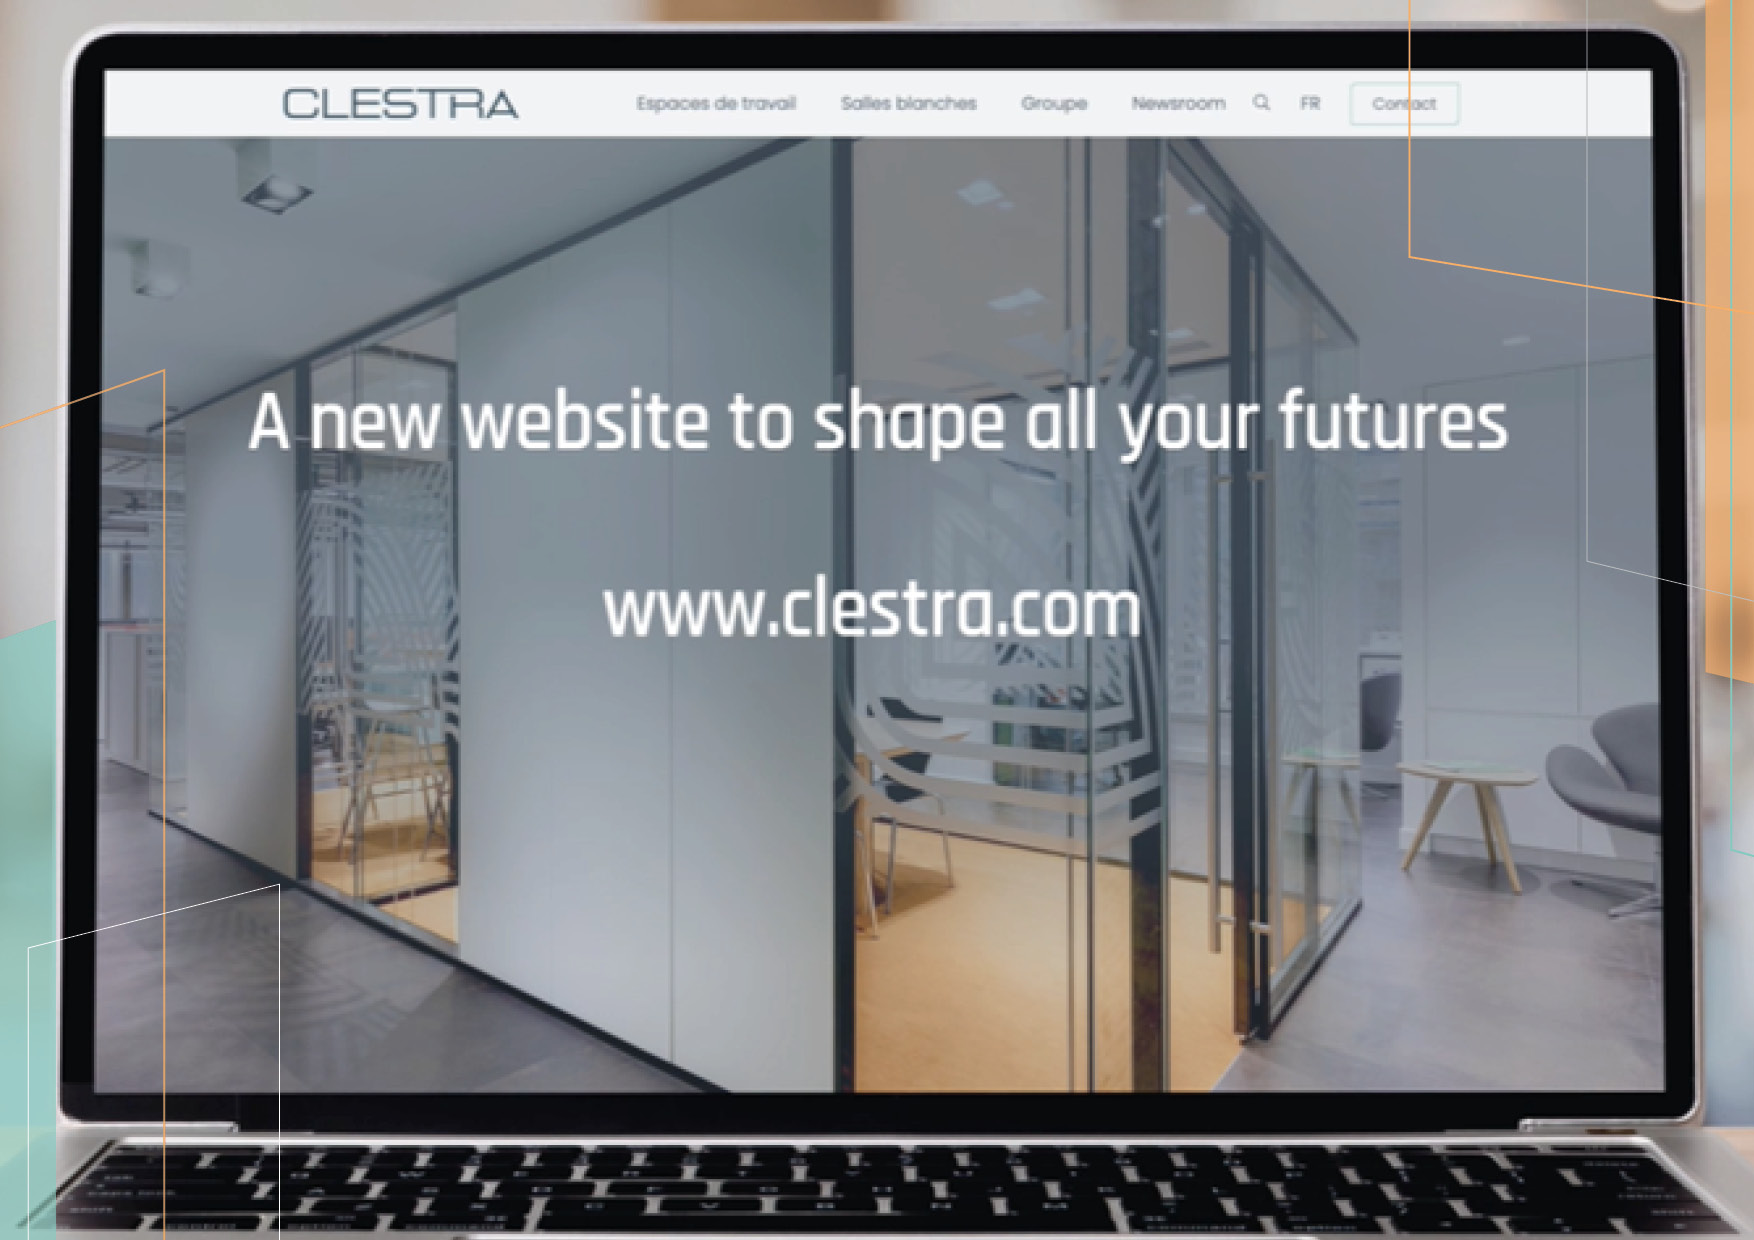 Clestra launches his new web site